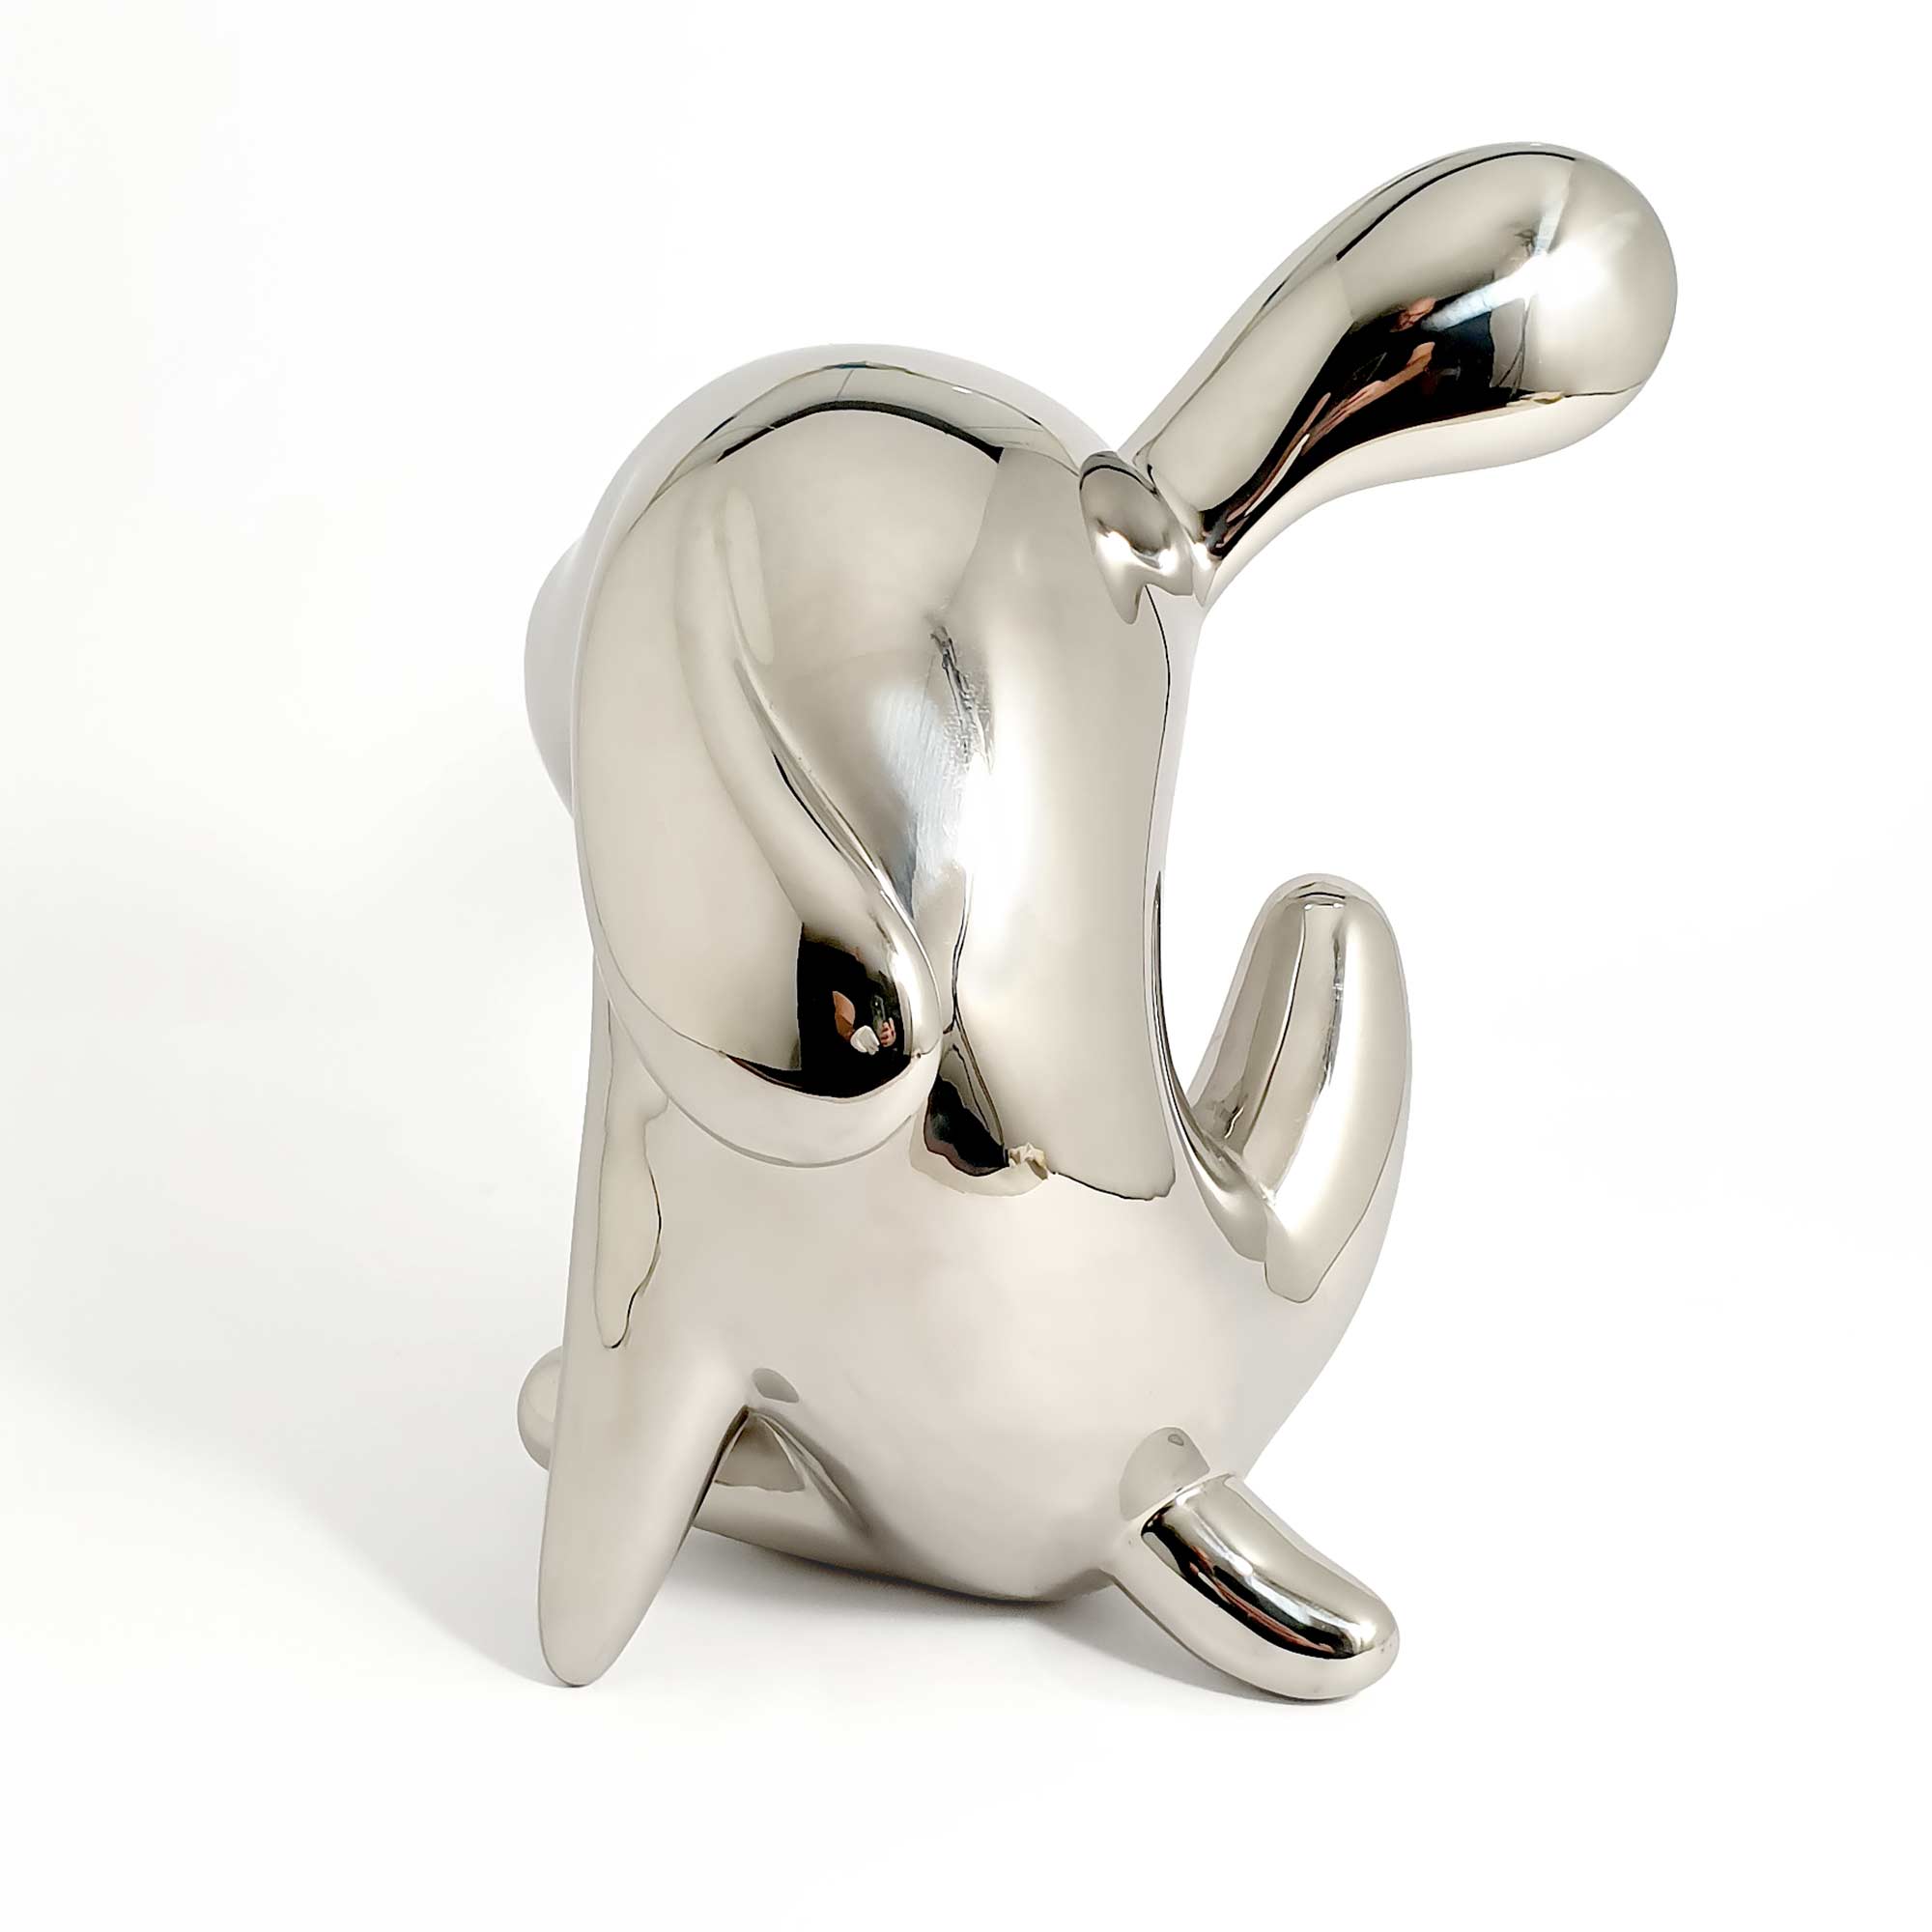 The itch, dog sculpture, Mirror Polished Stainless Steel Sculpture, by artist Ferdi B Dick, back view 